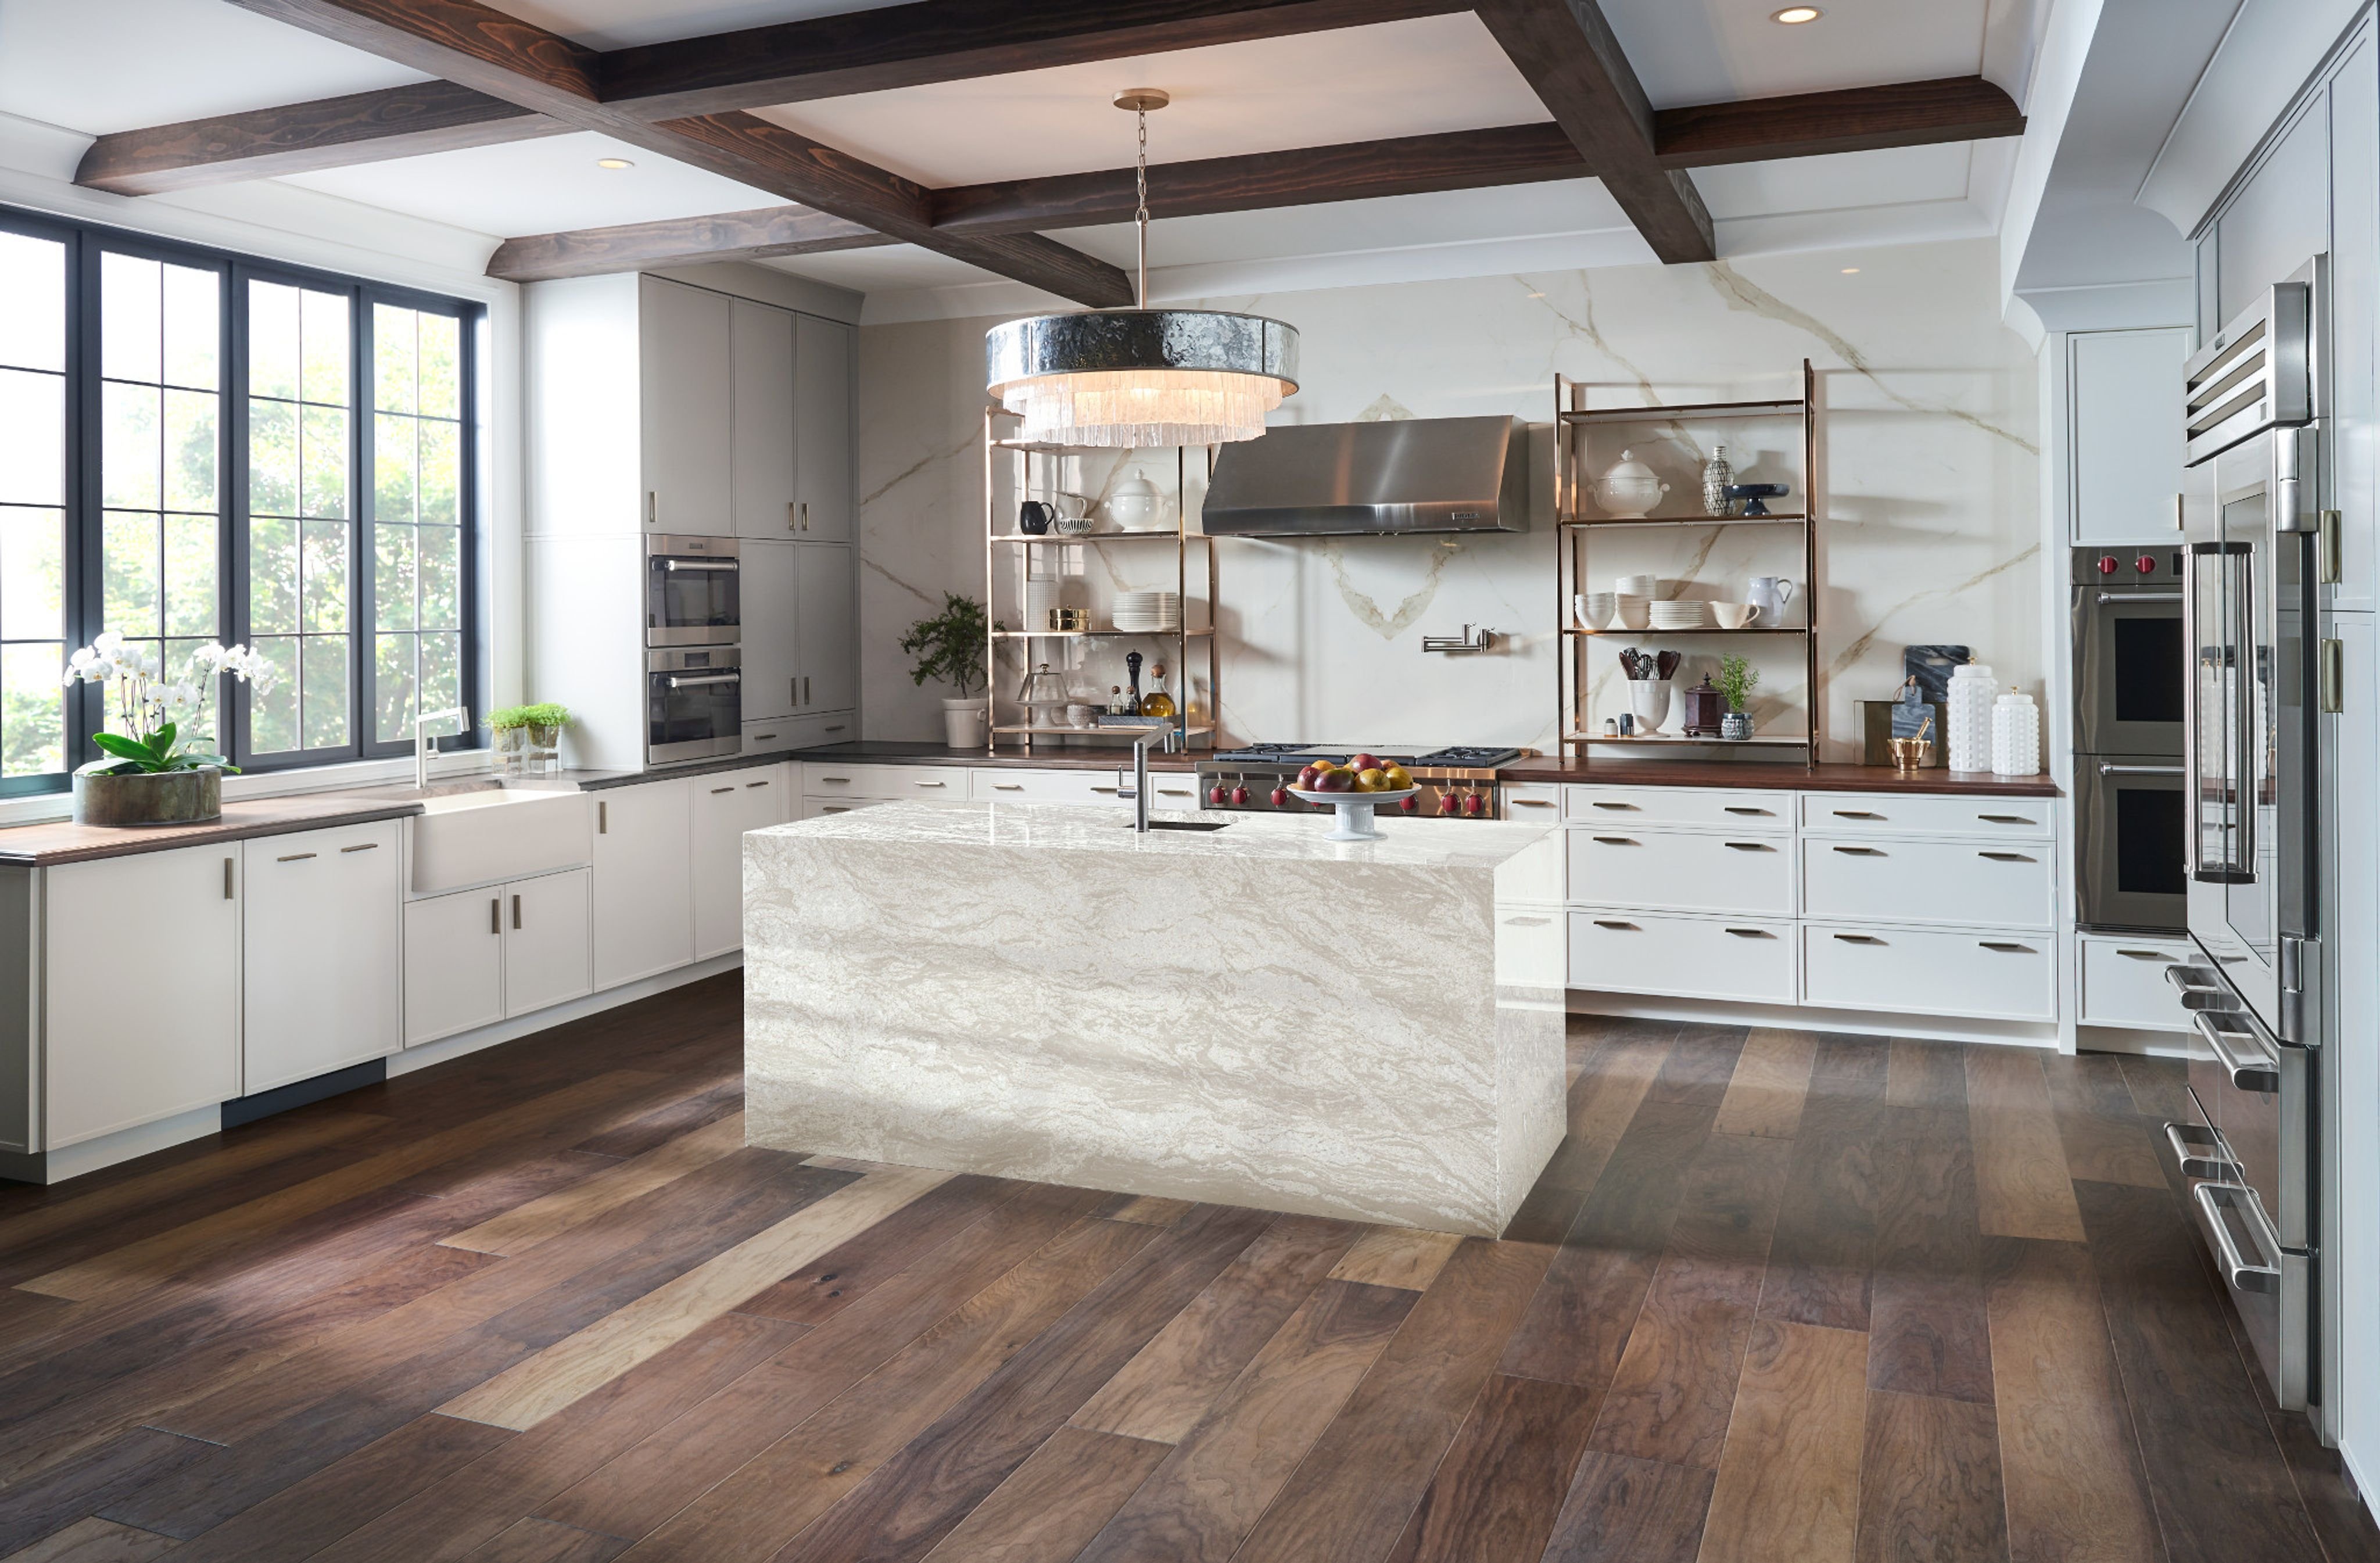 Kitchen with hardwood flooring - Floor refinishing services to revitalize the look of your home from Korfhage Floor Covering in the Louisville, KY area